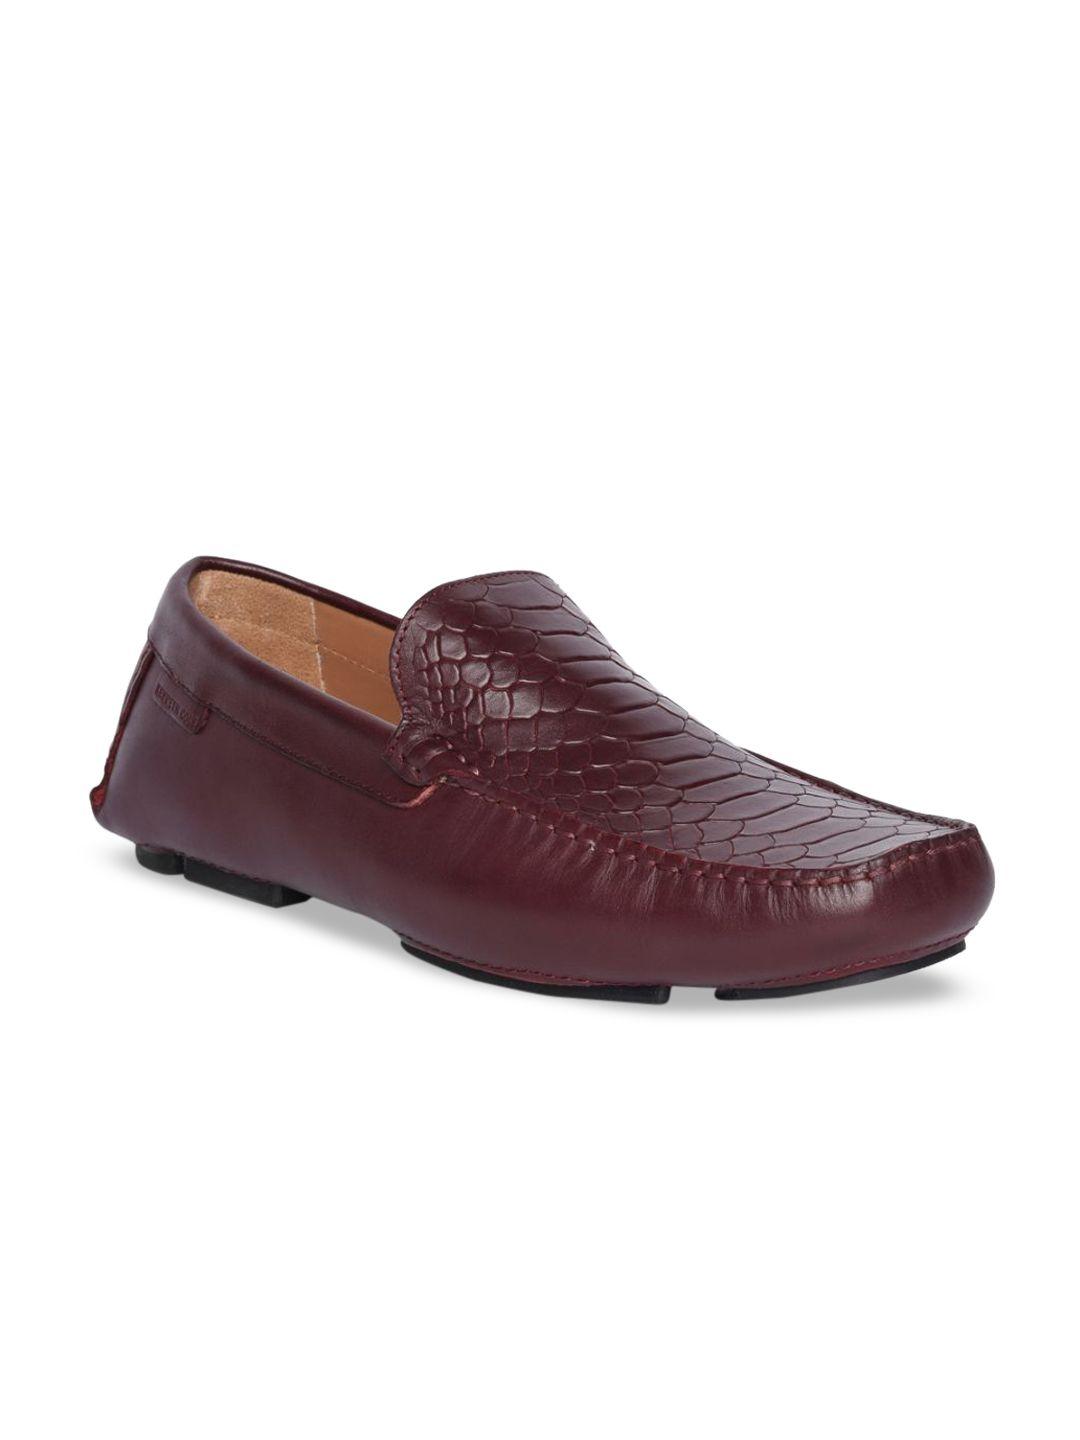 kenneth-cole-men-burgundy-textured-leather-loafers